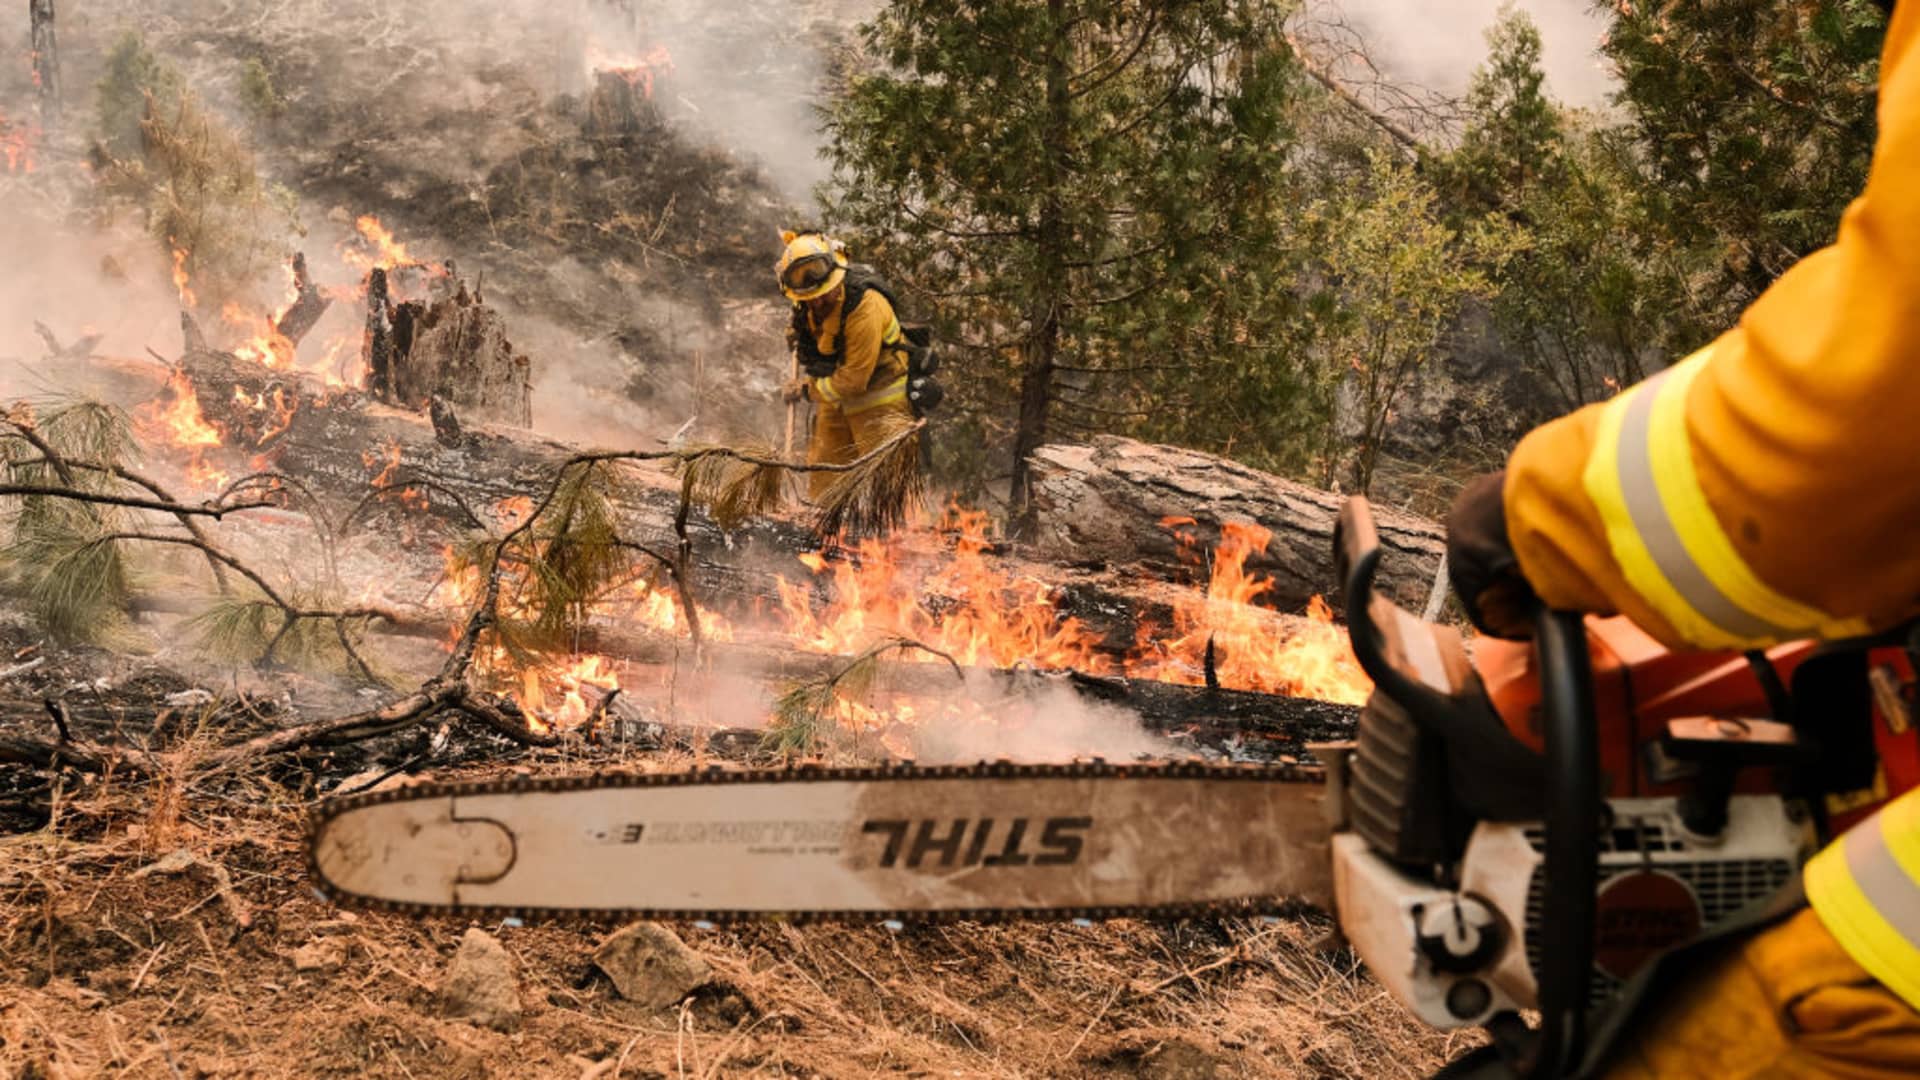 Firefighters work to contain a fire in order to save a structure located near Jerseydale Road during the Oak Fire in Mariposa County, California, US, on Sunday, July 24, 2022.